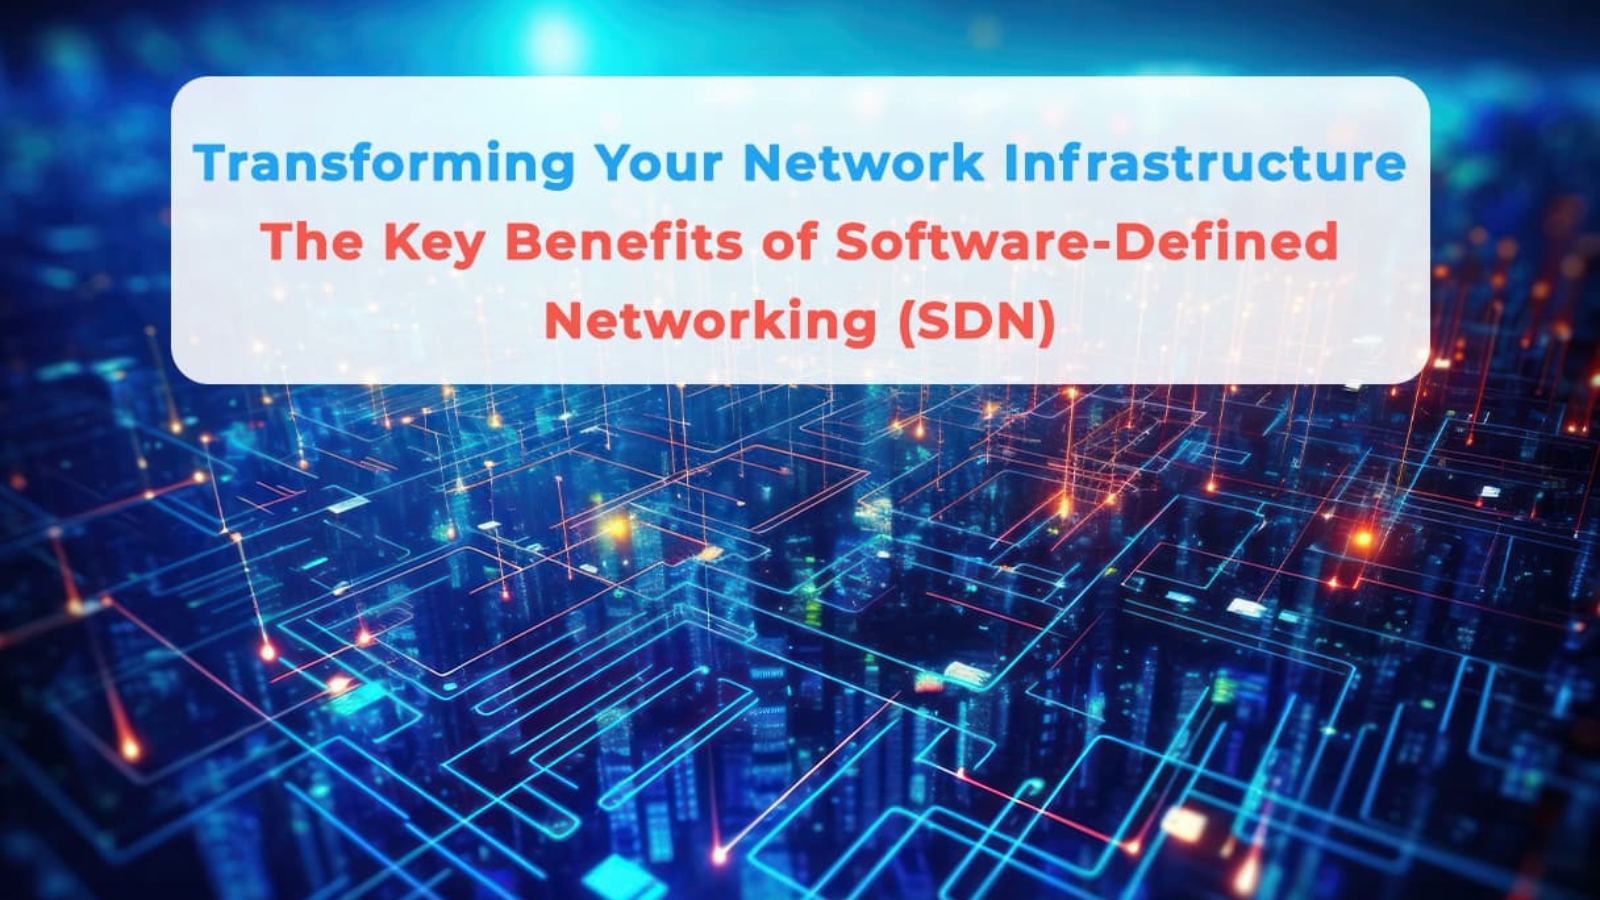 The Key Benefits of Software-Defined Networking (SDN)